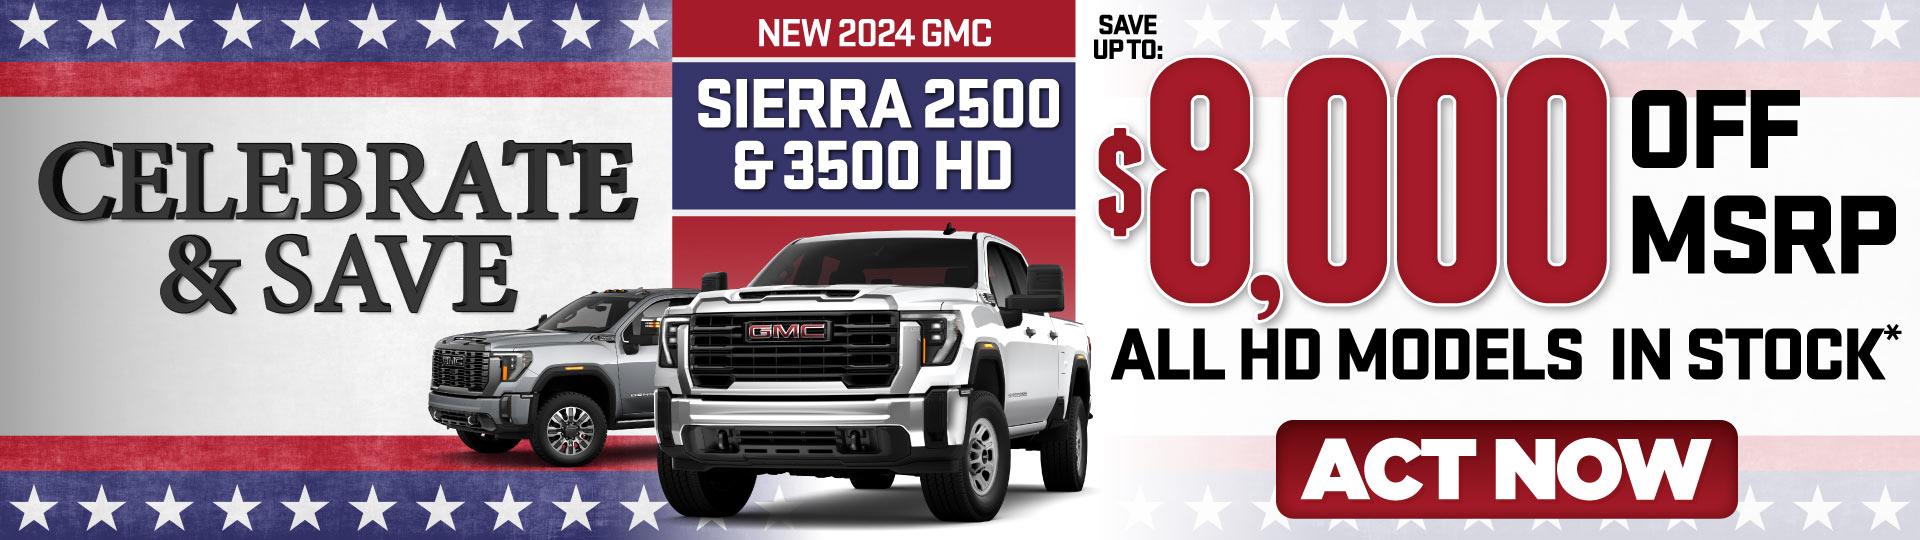 New 2024 GMC Sierra 2500 & 3500 HD - Save Up To $8,000 Off MSRP All HD Models In Stock* — Act Now